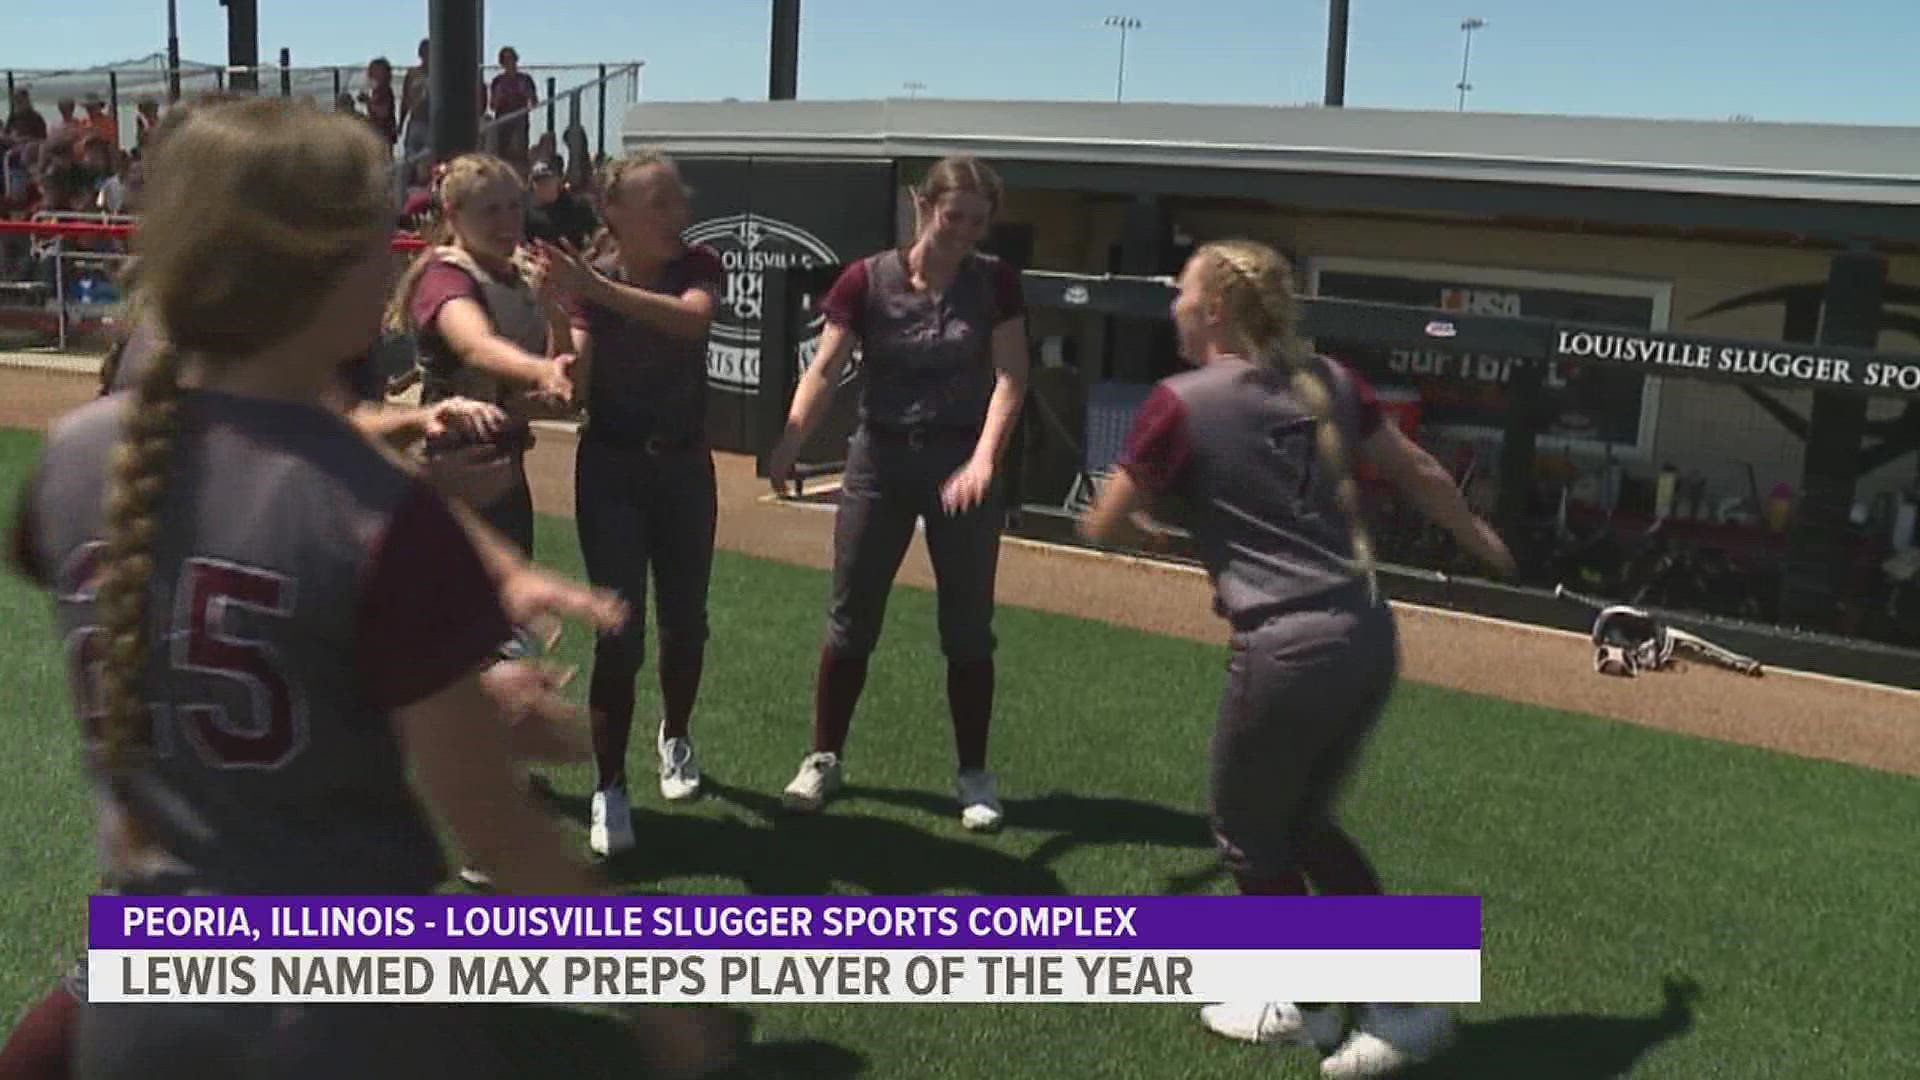 The undefeated, two-time state champion softball pitcher was named Player of the Year after helping guide Rockridge to a 65-win streak.